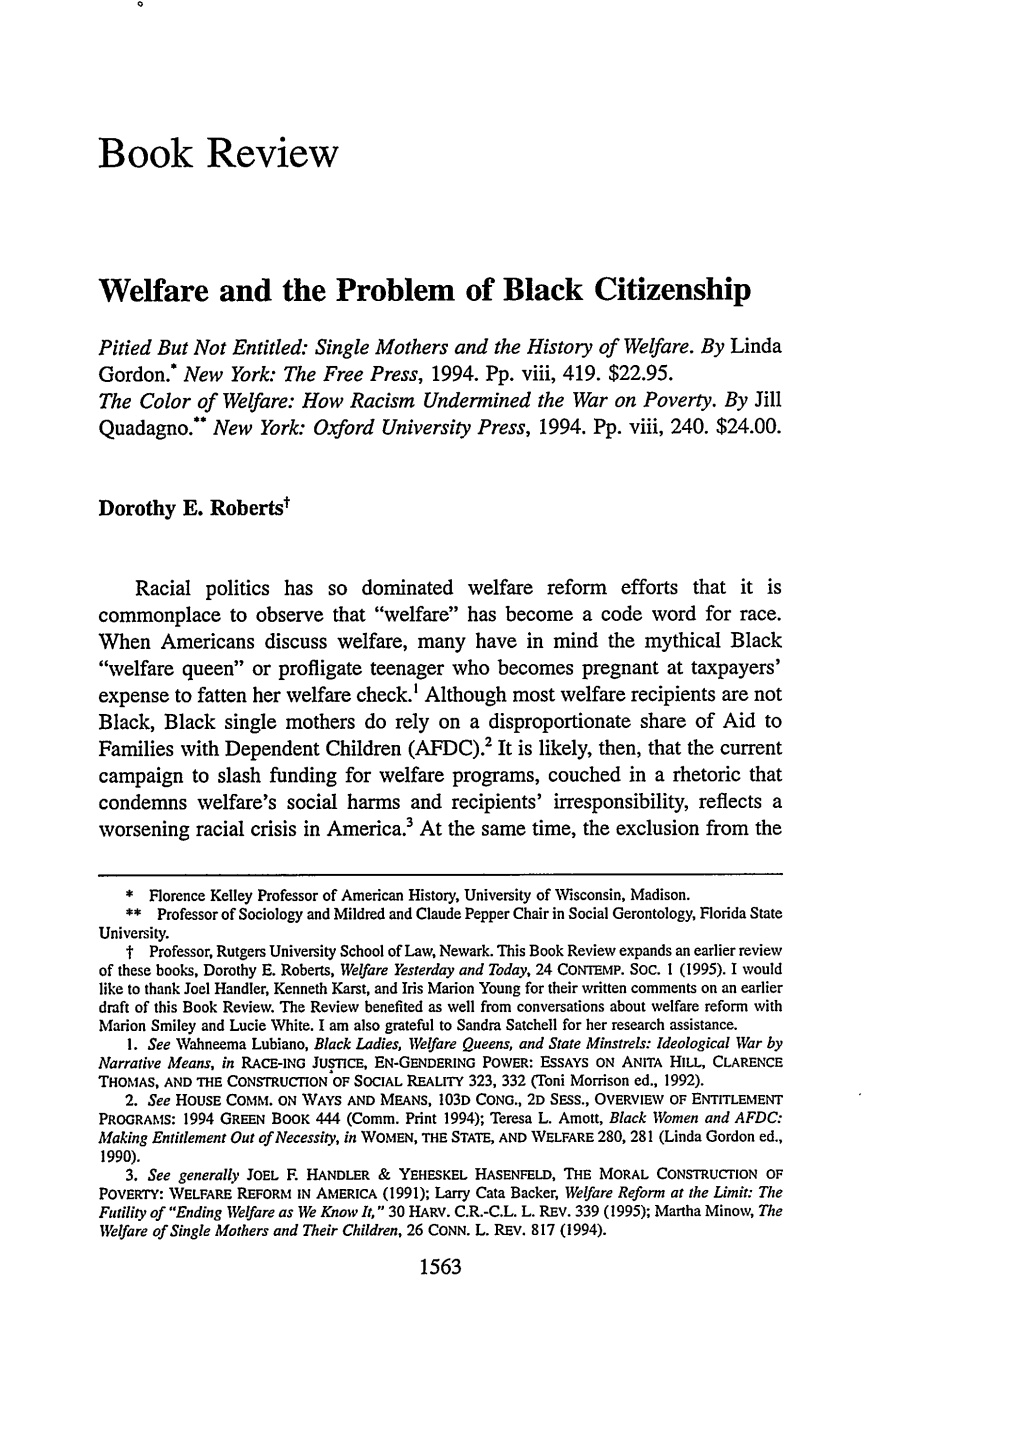 Welfare and the Problem of Black Citizenship